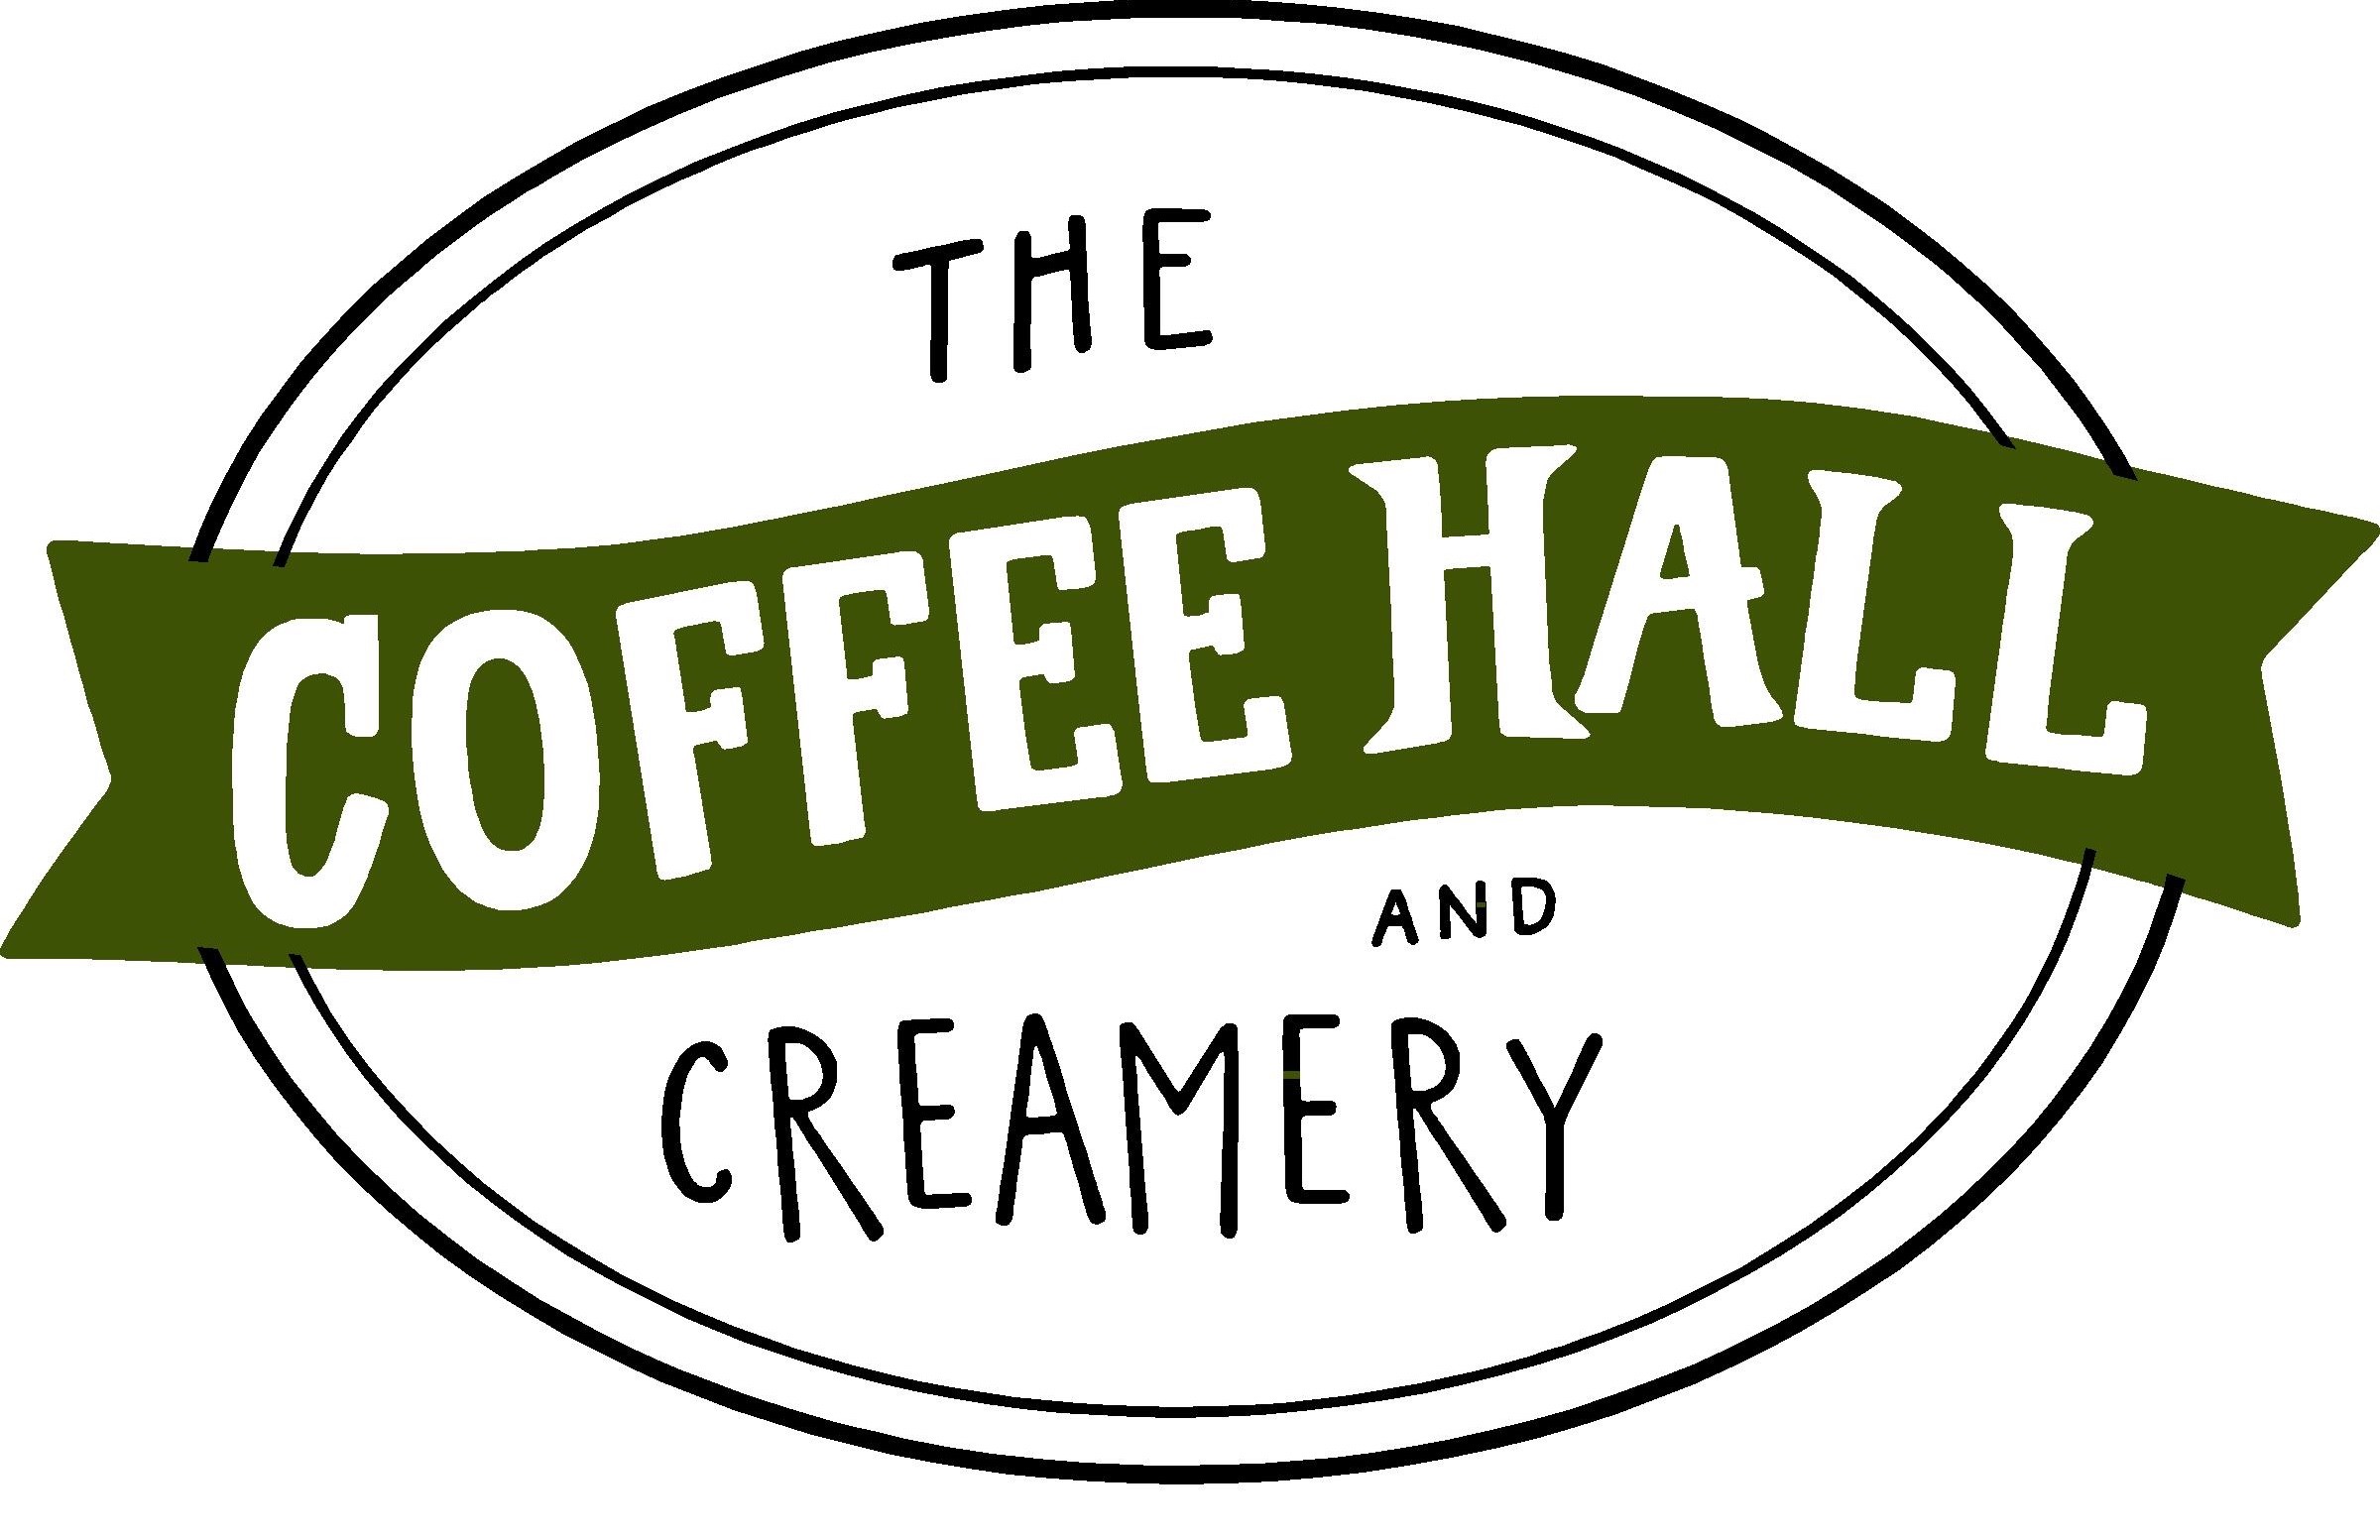 The Coffee Hall and Creamery